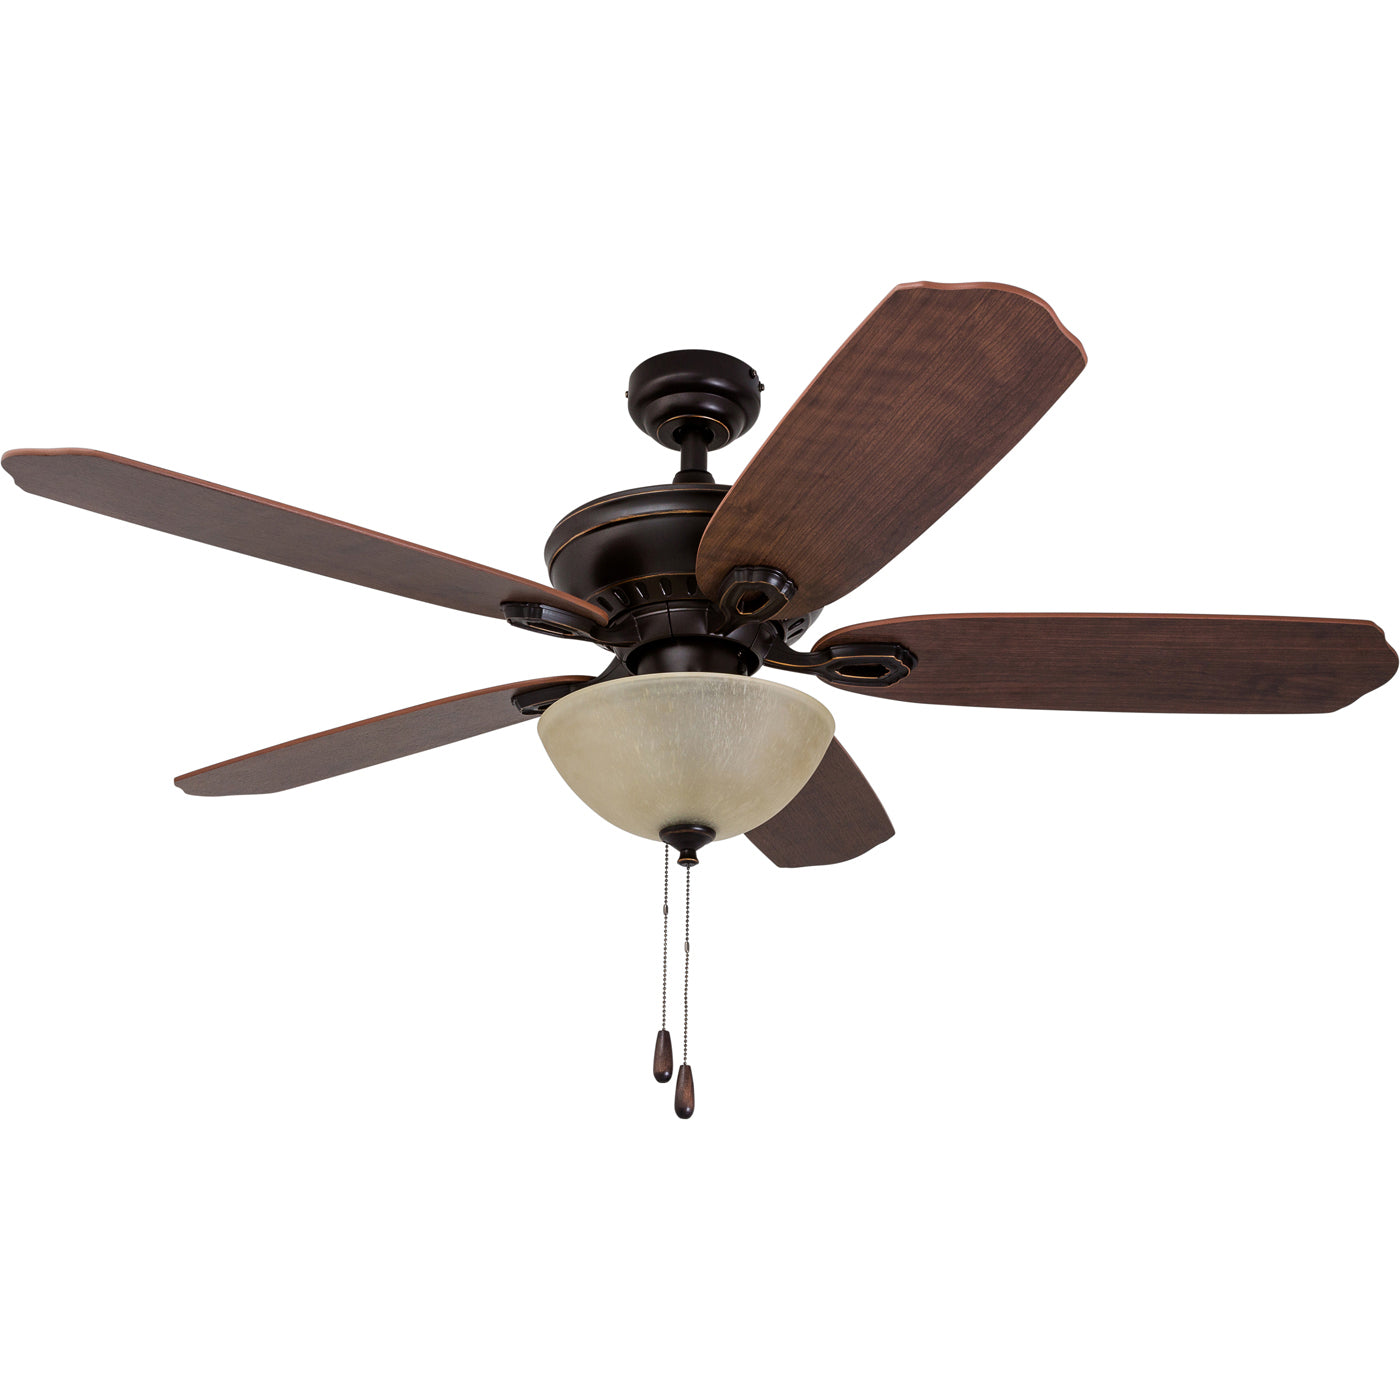 52 Inch Spring Hollow, Oil Rubbed Bronze, Pull Chain, Ceiling Fan by Prominence Home